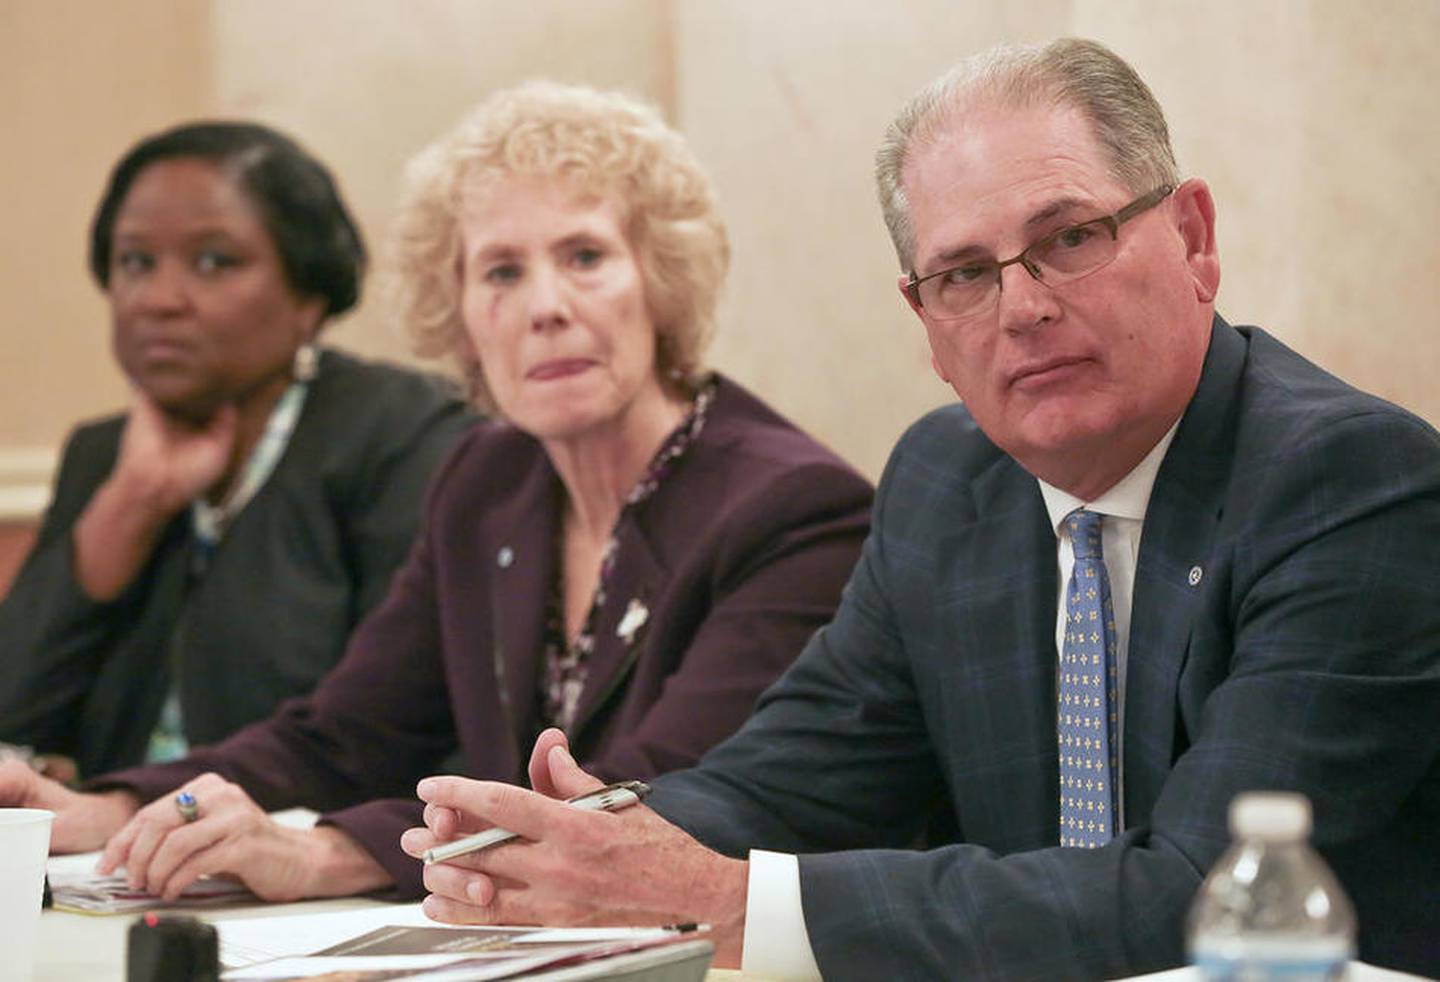 Members of the new Rialto Square Theater board convene first time since being appointed by Mayor Bob O'Dekirk and Gov. Bruce Rauner on Wednesday, Jan. 25, 2017, in Joliet, Ill. Robert Filotto (right), an accountant who owns Filotto Professional Services in Joliet, was elected as the board's chairman.